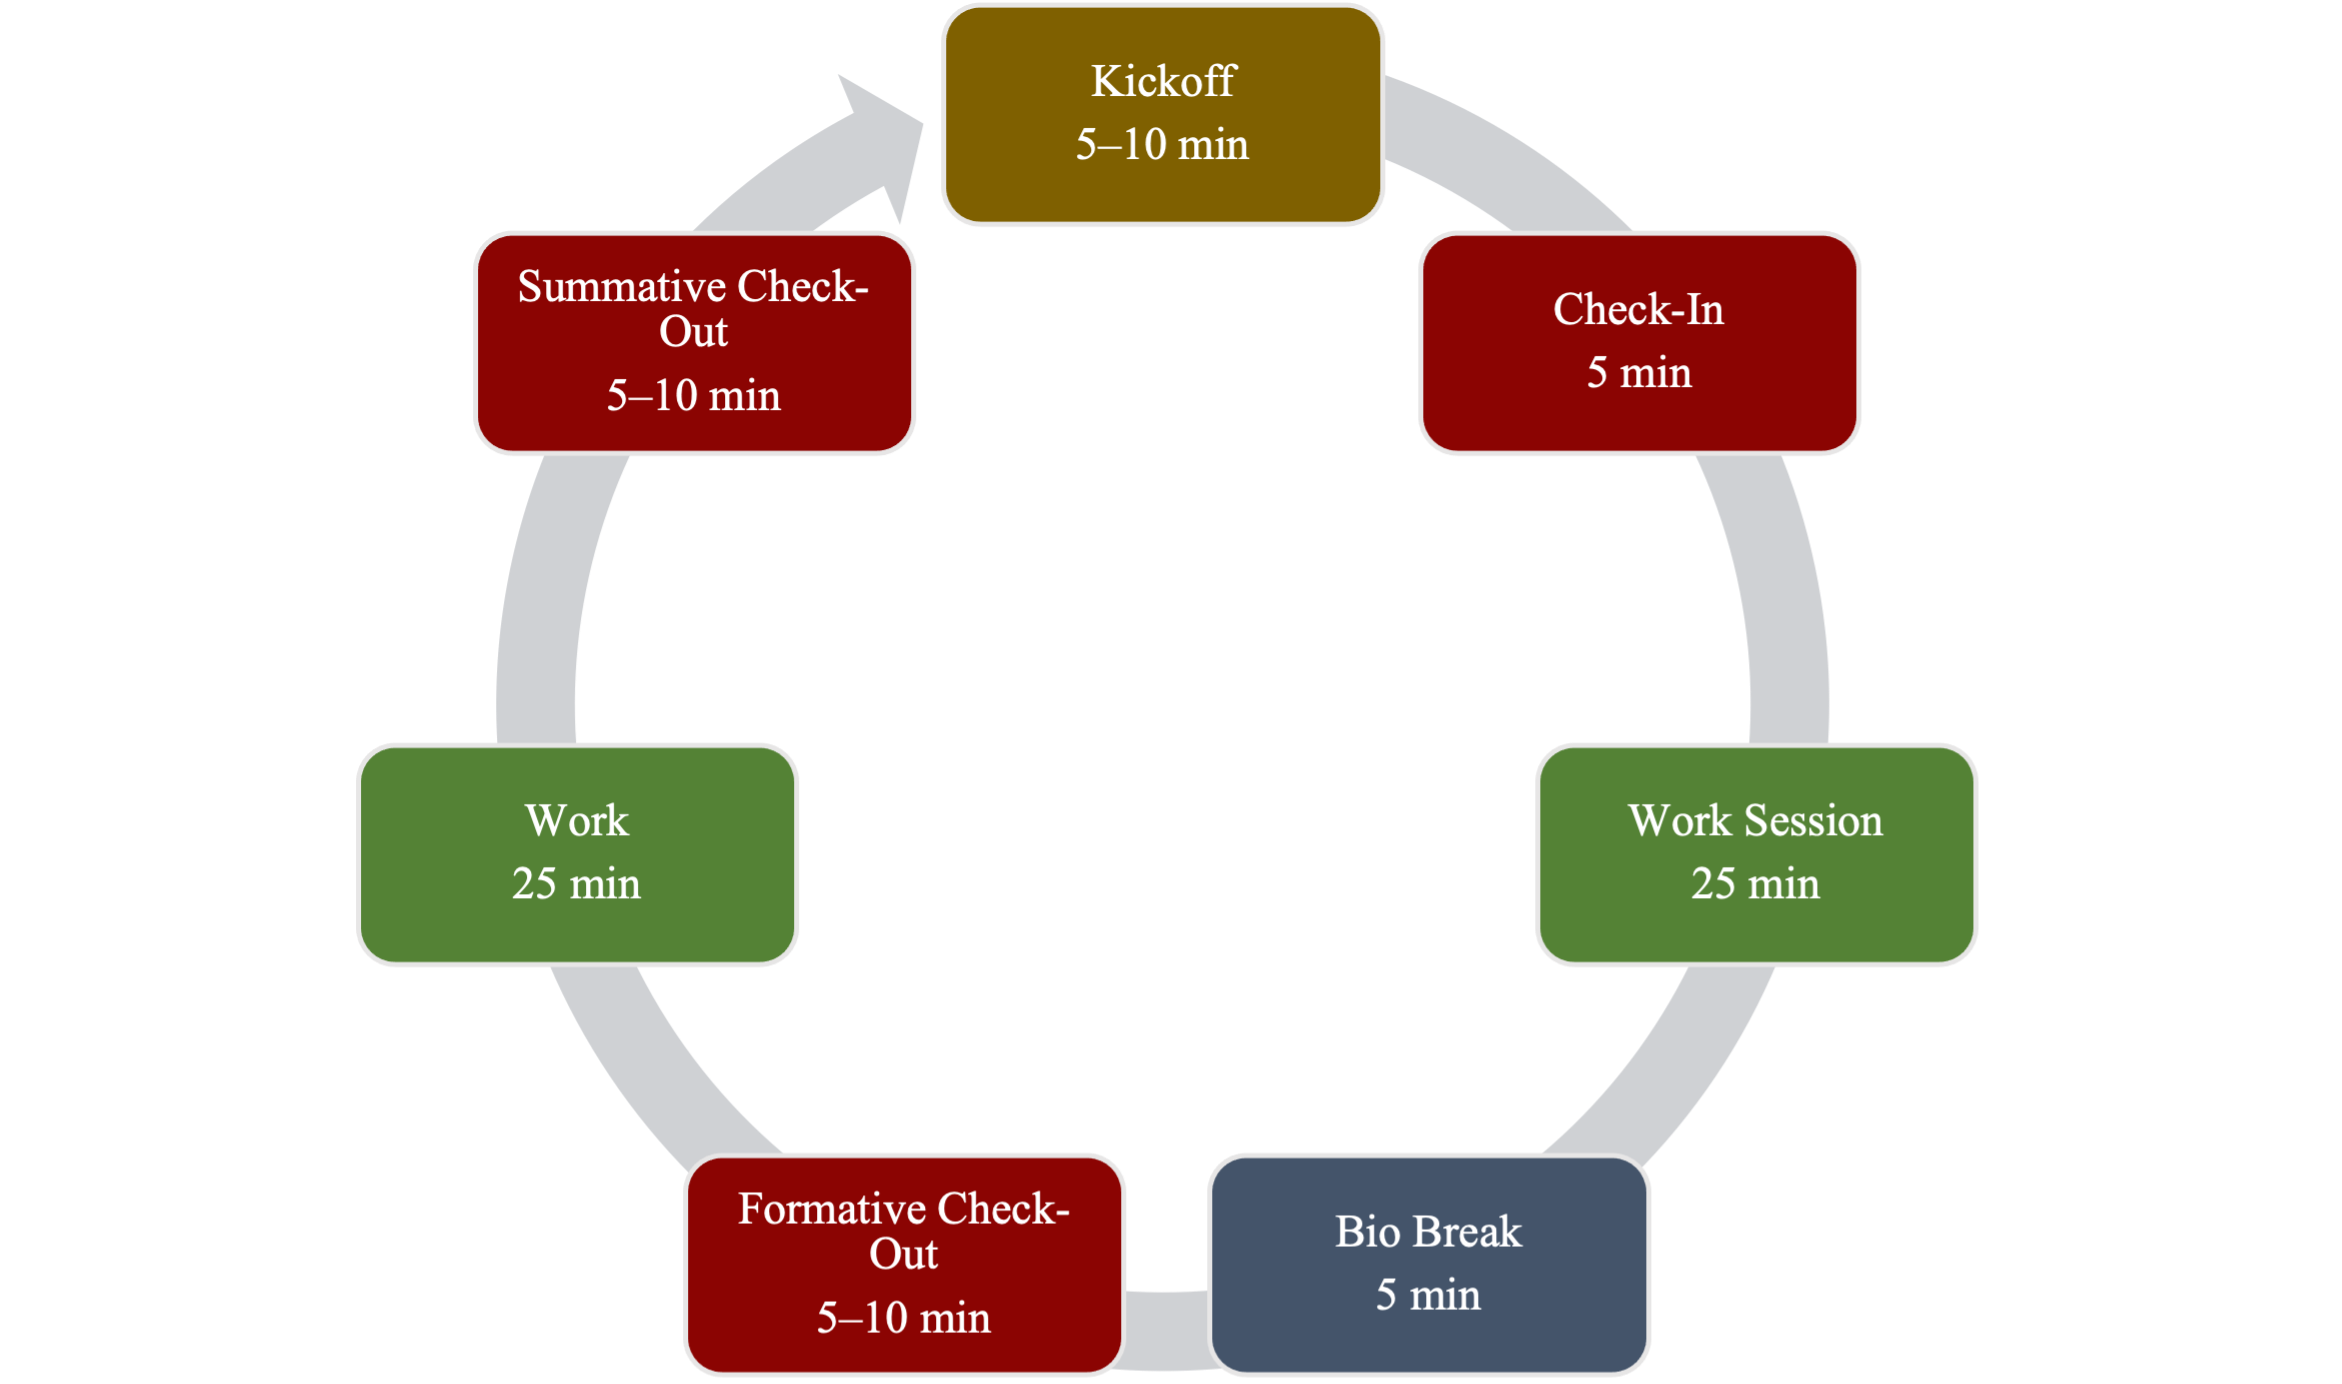 A circular flow chart that an arrow shows moving clock-wise. From the beginning to end of the flow chart the boxes are labeled: Kickoff (5 to 10 minutes), Check-in (5 minutes), Work Session (25 minutes), Bio Break (5 minutes), Formative Check-Out (5 to 10 minutes), Work (25 minutes), and Summative Check-Out (5 to 10 minutes).